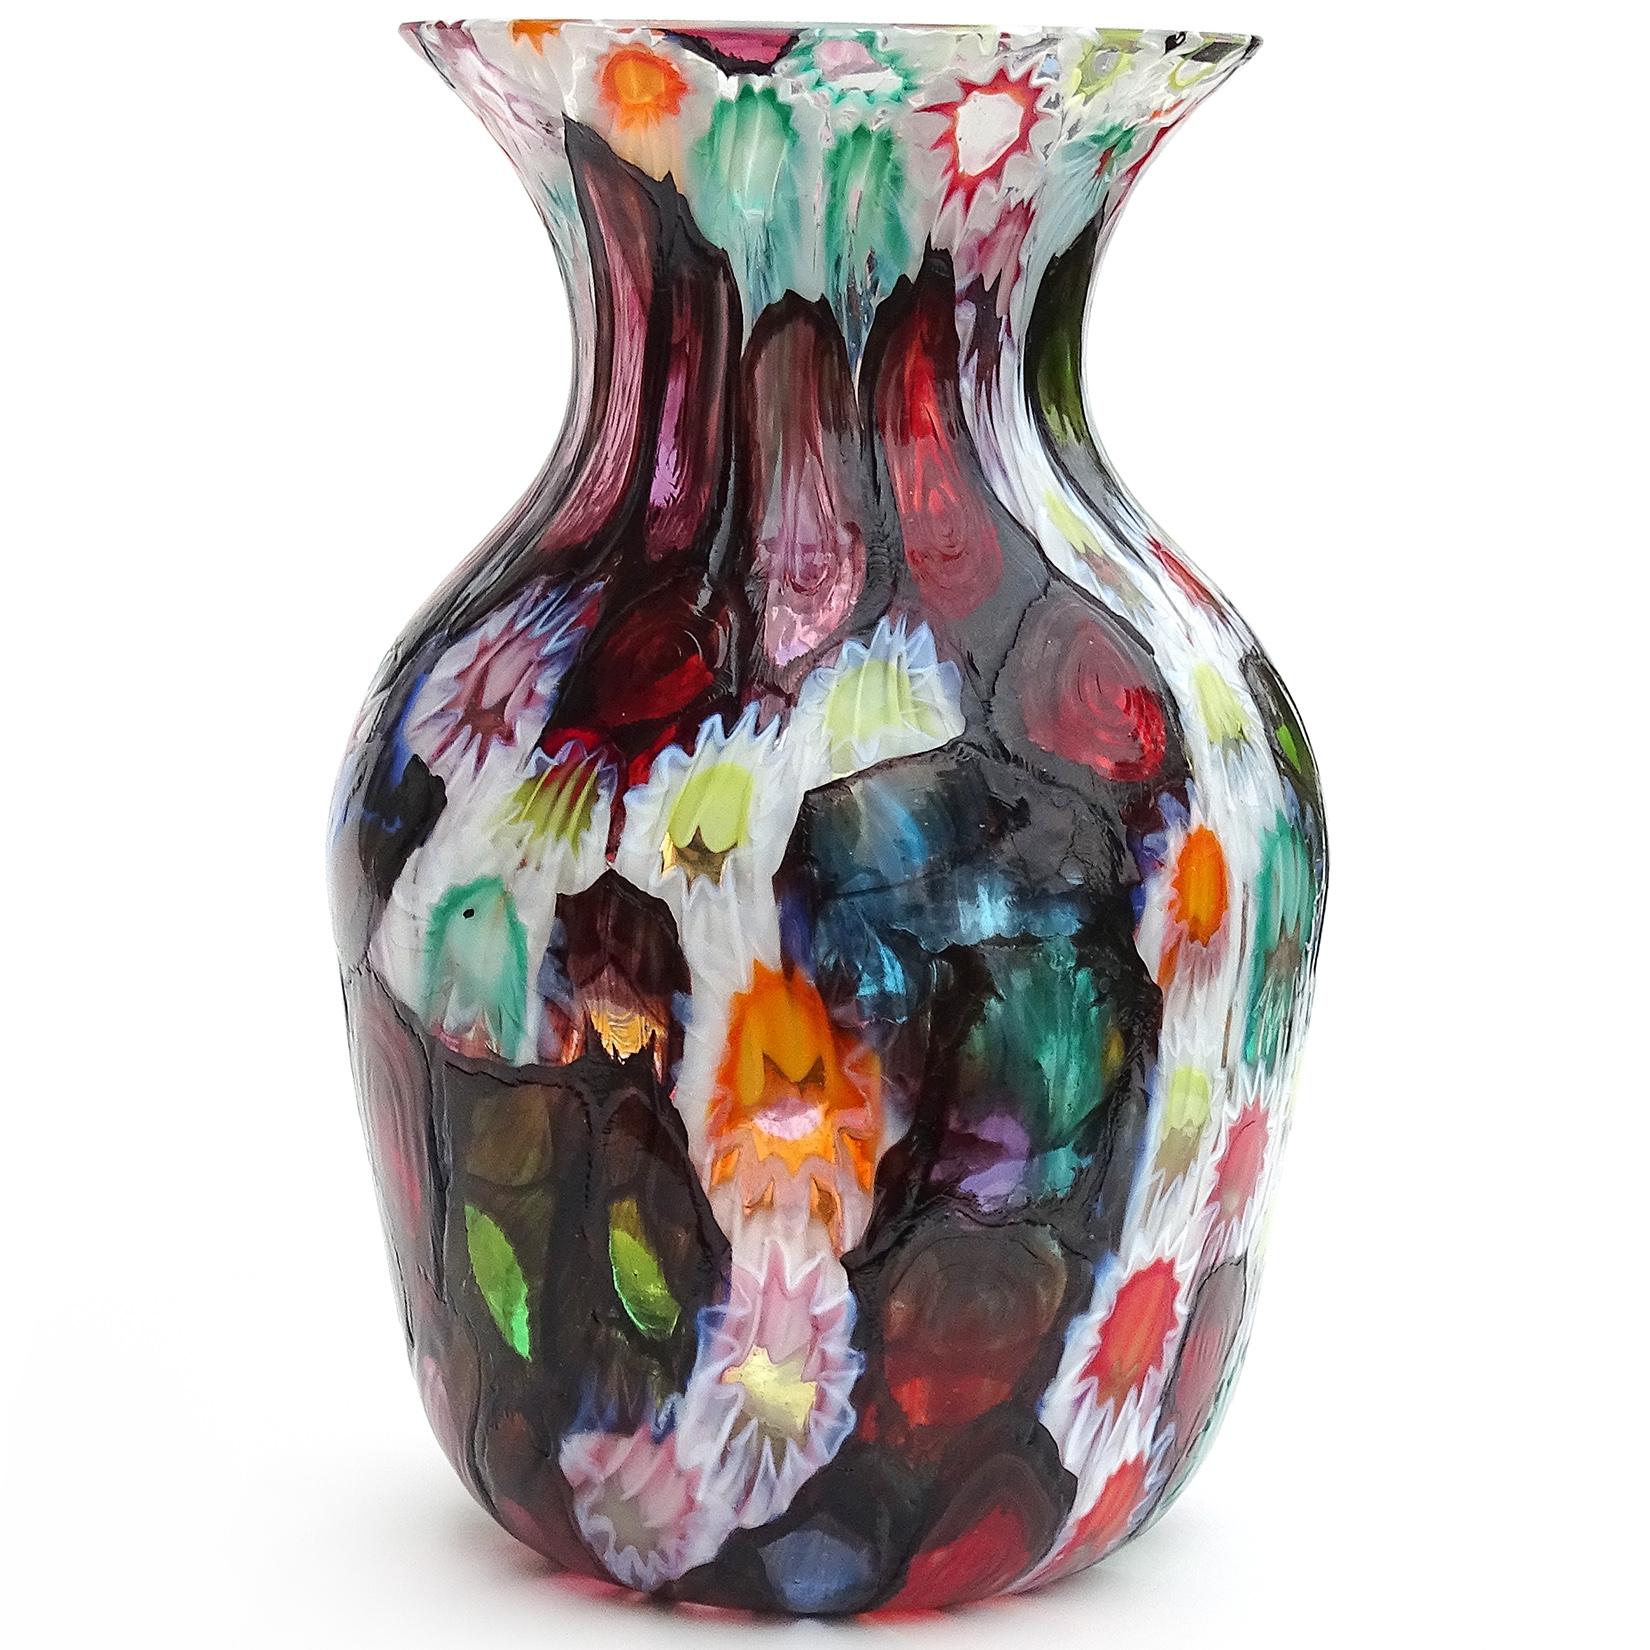 Beautiful Murano hand blown multi-color Millefiori flowers or stars mosaic Italian art glass flower vase. Documented to the Fratelli Toso company. Many of the murrines are lined in metallic black, like stained glass windows. Has blue, red, pink,